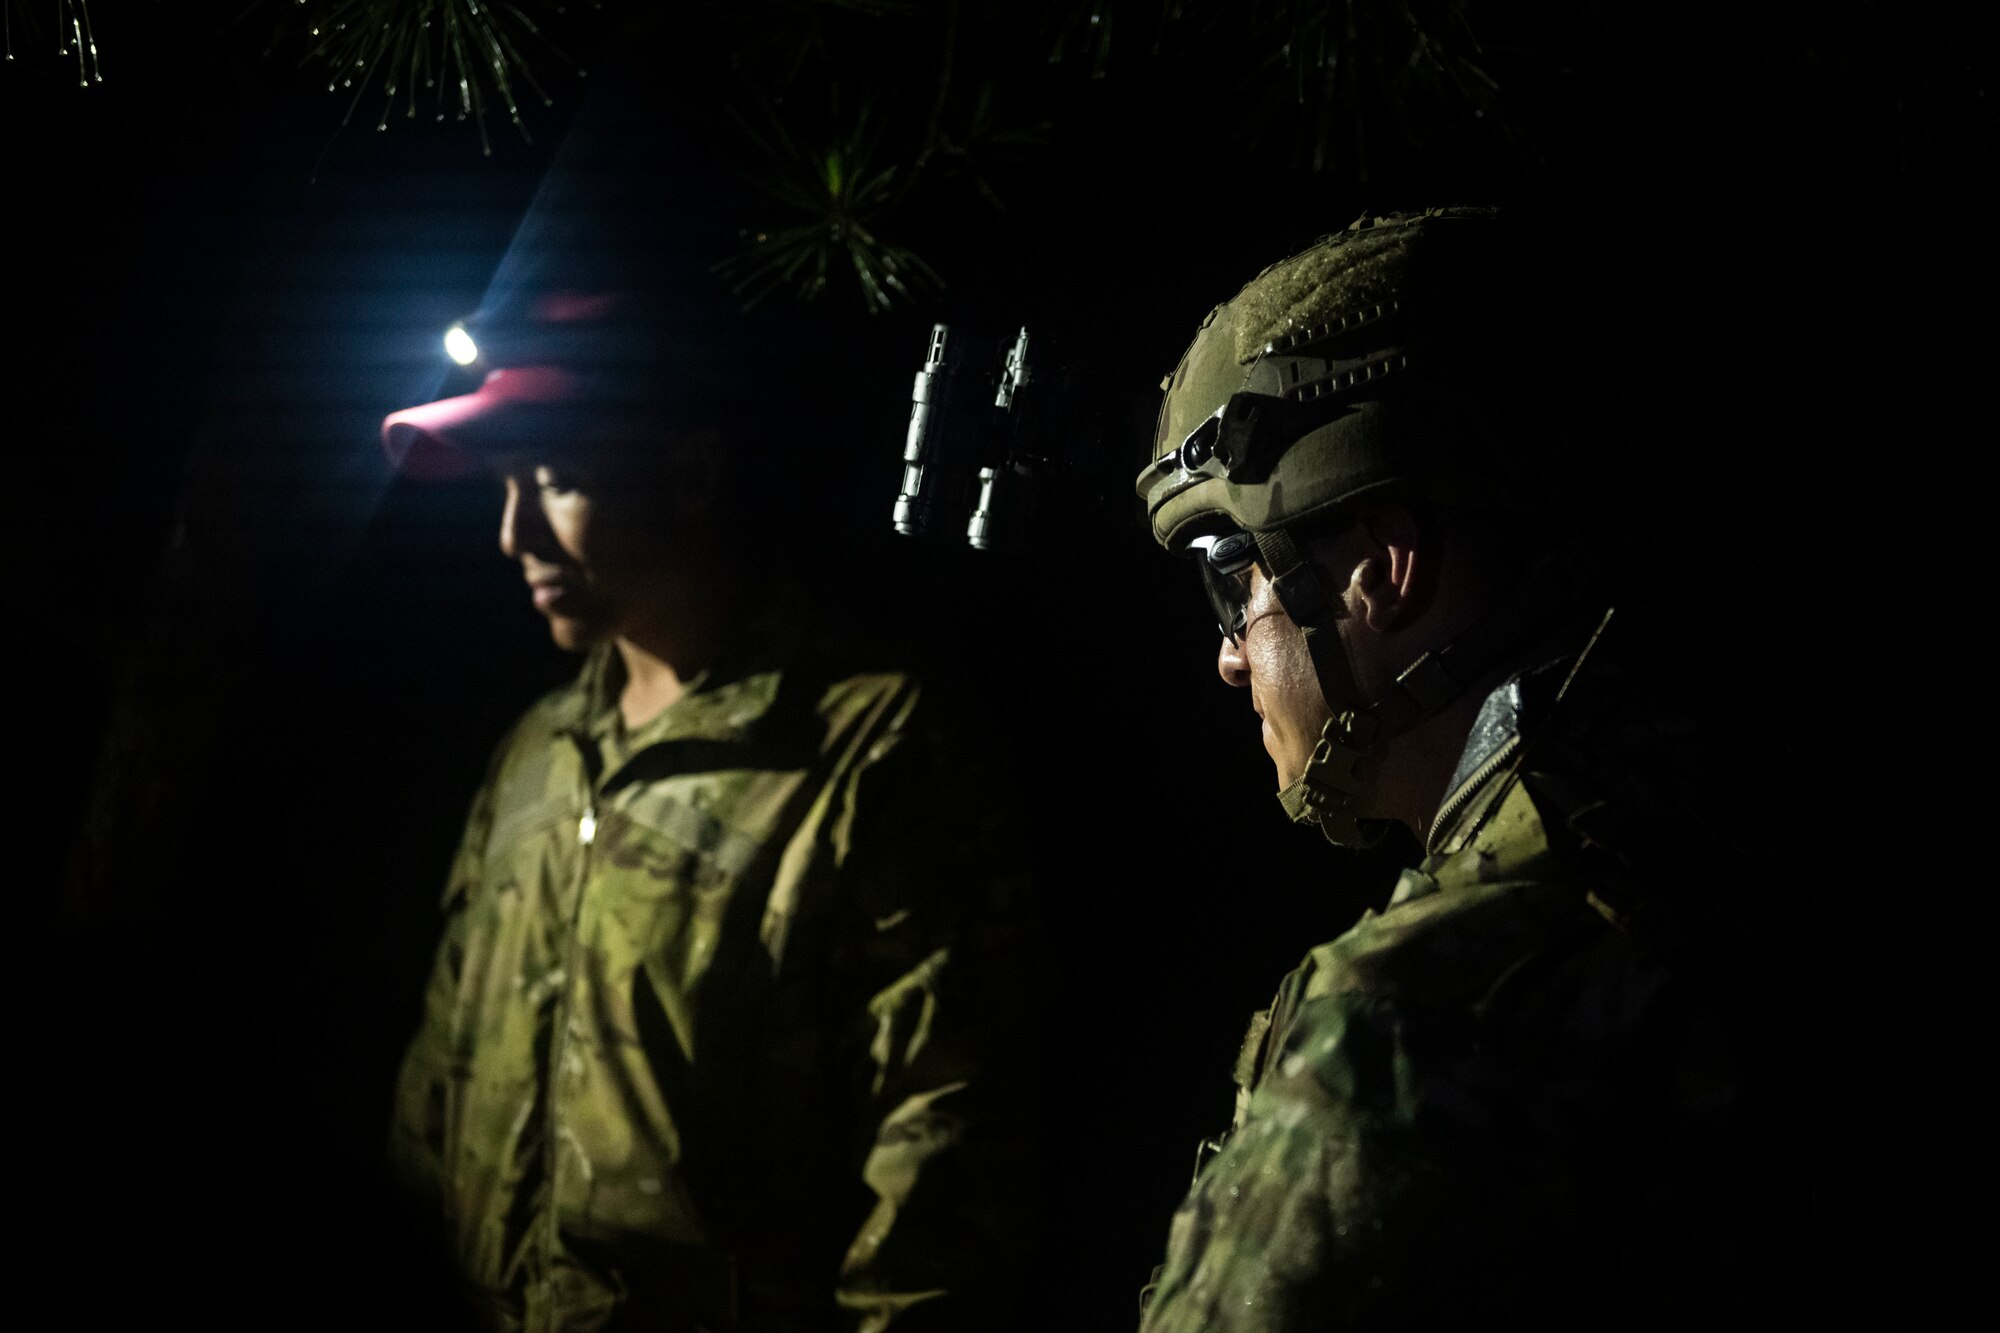 U.S. military members in tactical gear stands on a dark trail.